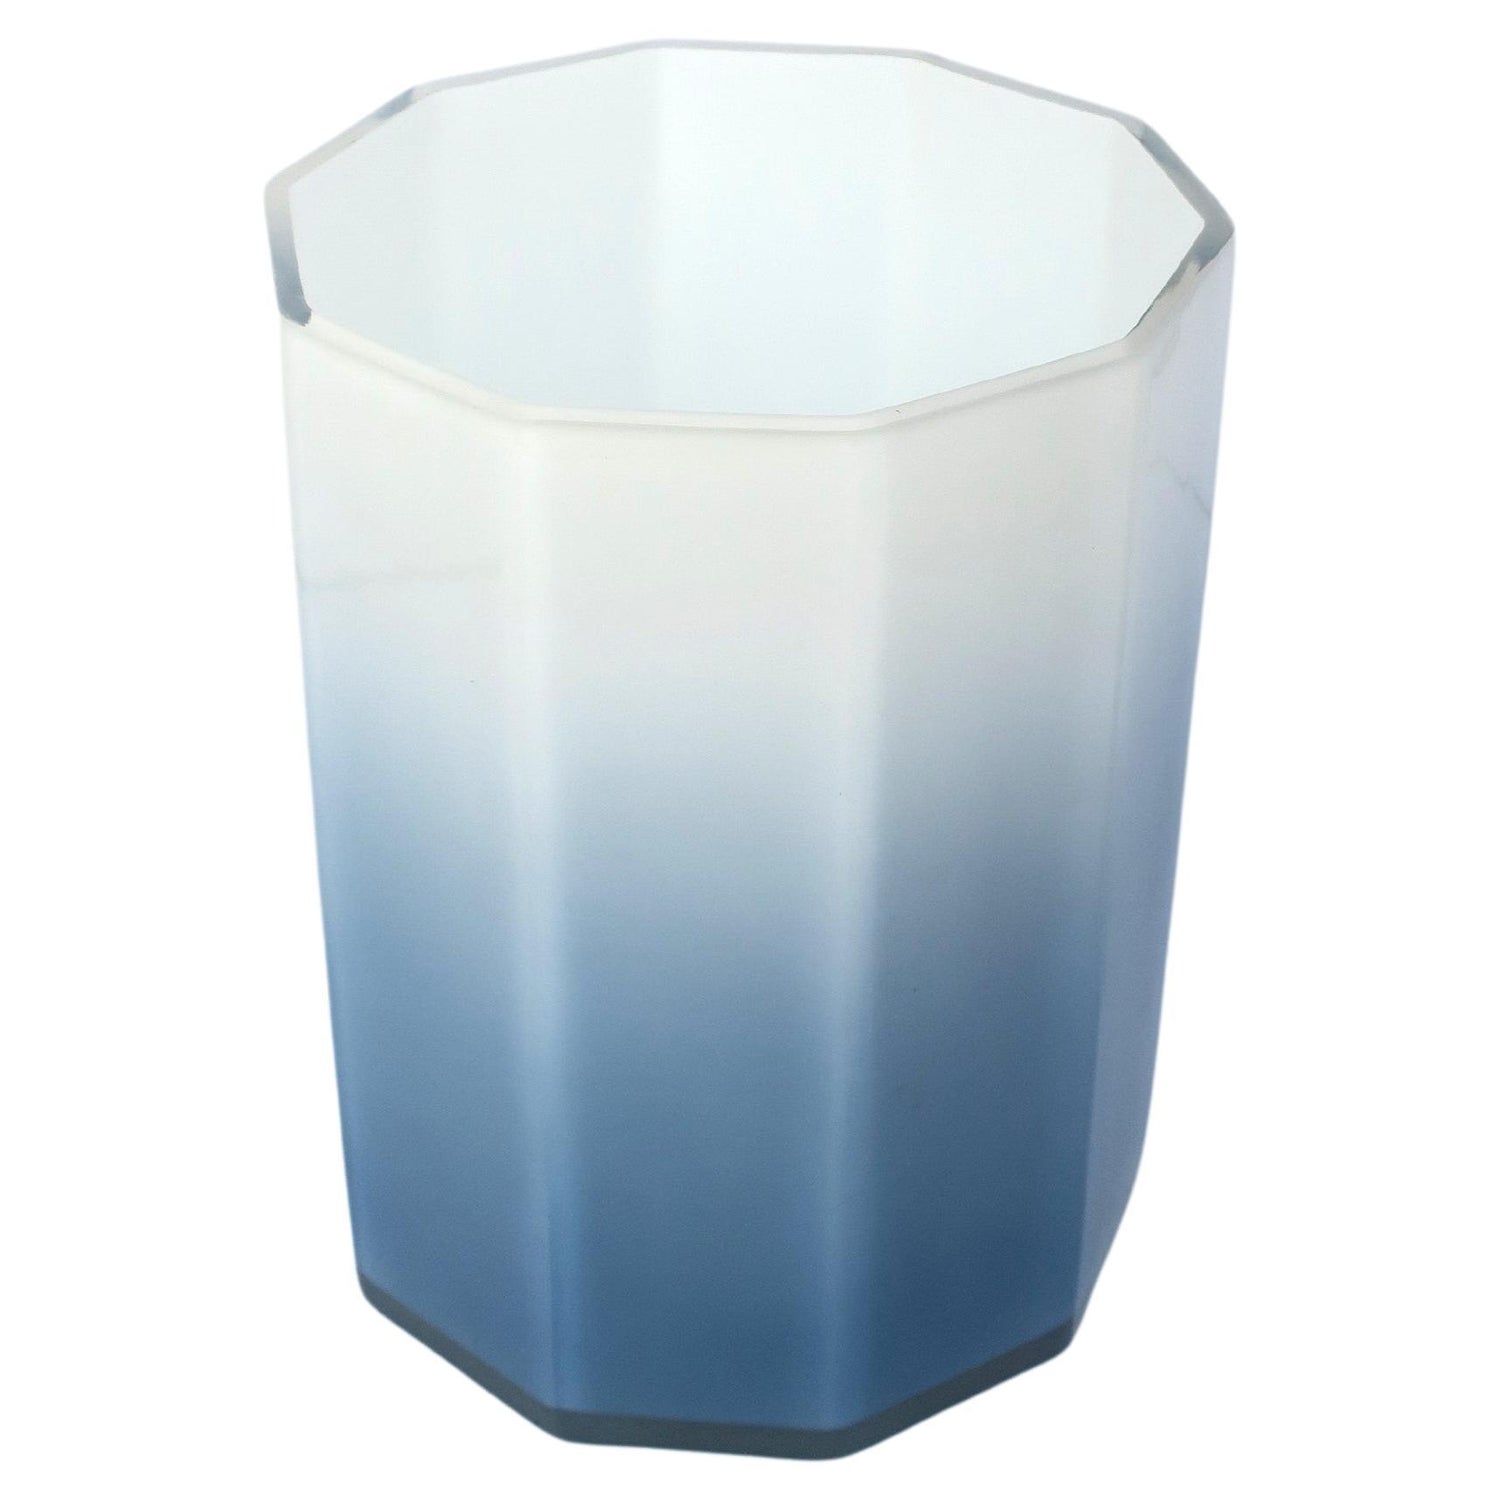 https://a.1stdibscdn.com/blue-and-white-acrylic-wastebasket-or-trash-can-for-sale/f_13142/f_340543221682814846610/f_34054322_1682814847115_bg_processed.jpg?width=1500